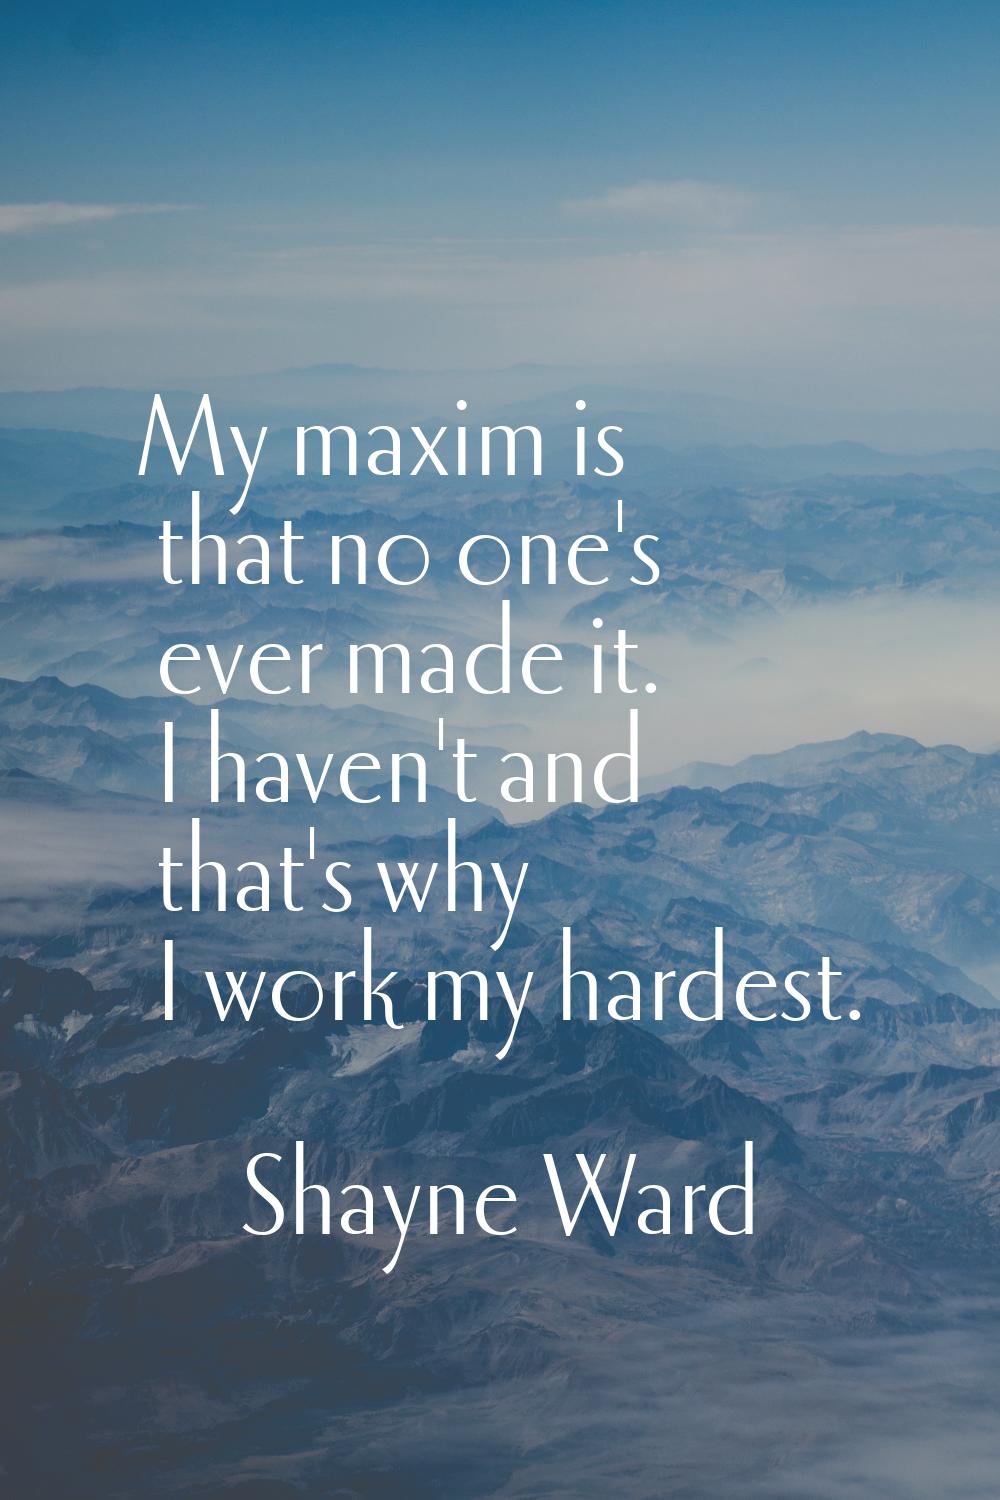 My maxim is that no one's ever made it. I haven't and that's why I work my hardest.